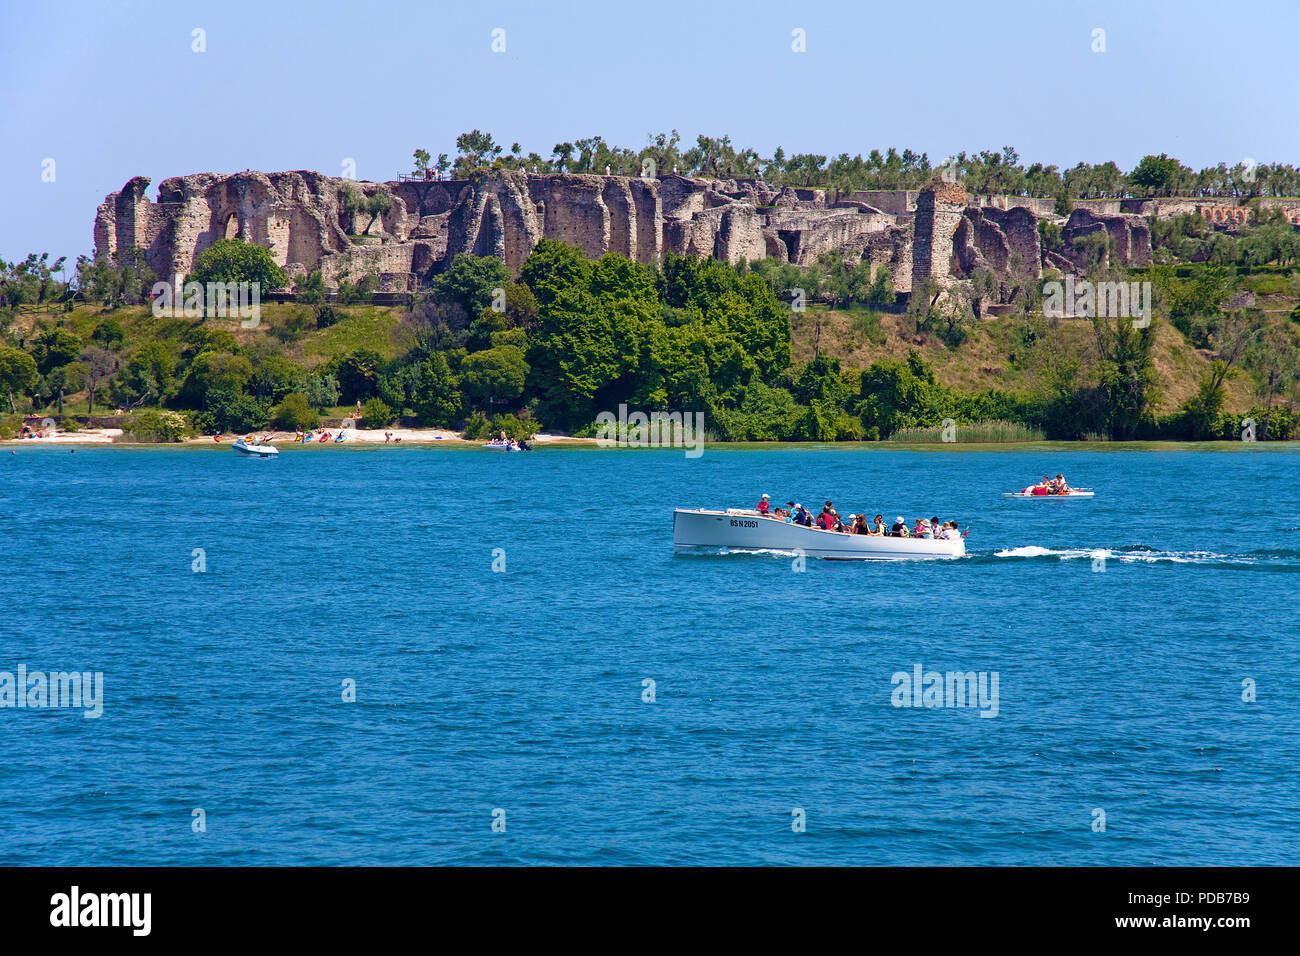 Excursion boat at Grotto of Catullus, above ruins of ancient roman villas, Sirmione, Lake Garda, Lombardy, Italy Stock Photo